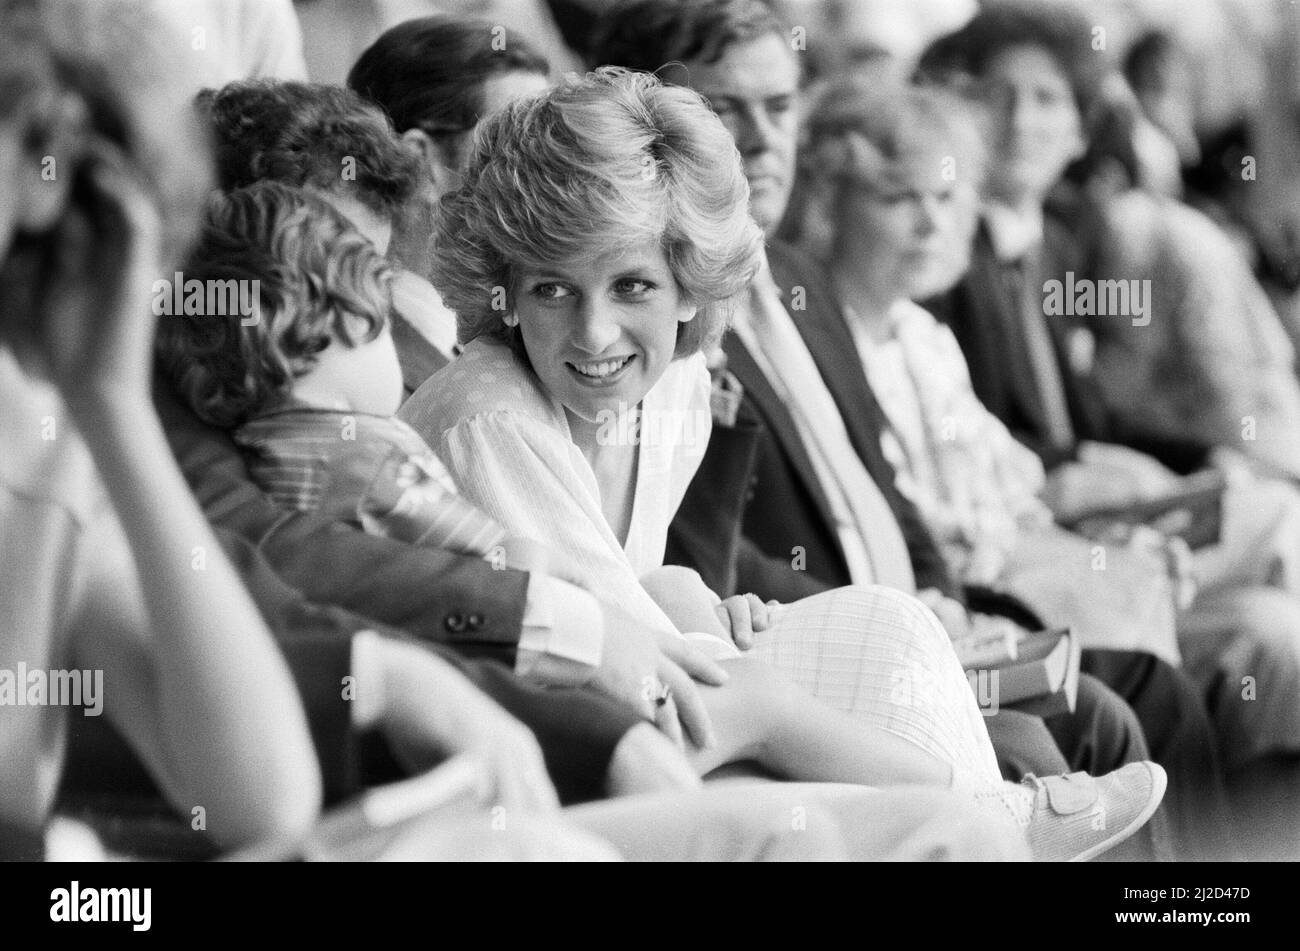 Live Aid dual venue benefit concert held on 13th July 1985 at Wembley Stadium in London, England, and the John F. Kennedy Stadium in Philadelphia, Pennsylvania, United States. The concerts were organised as a follow up to the Band Aid single 'Do They Know Its Christmas?'  to raise money for victims of the famine in Ethiopia. Picture shows  Princess Diana, Princess of Wales watching the performance during the concert at Wembley. Stock Photo